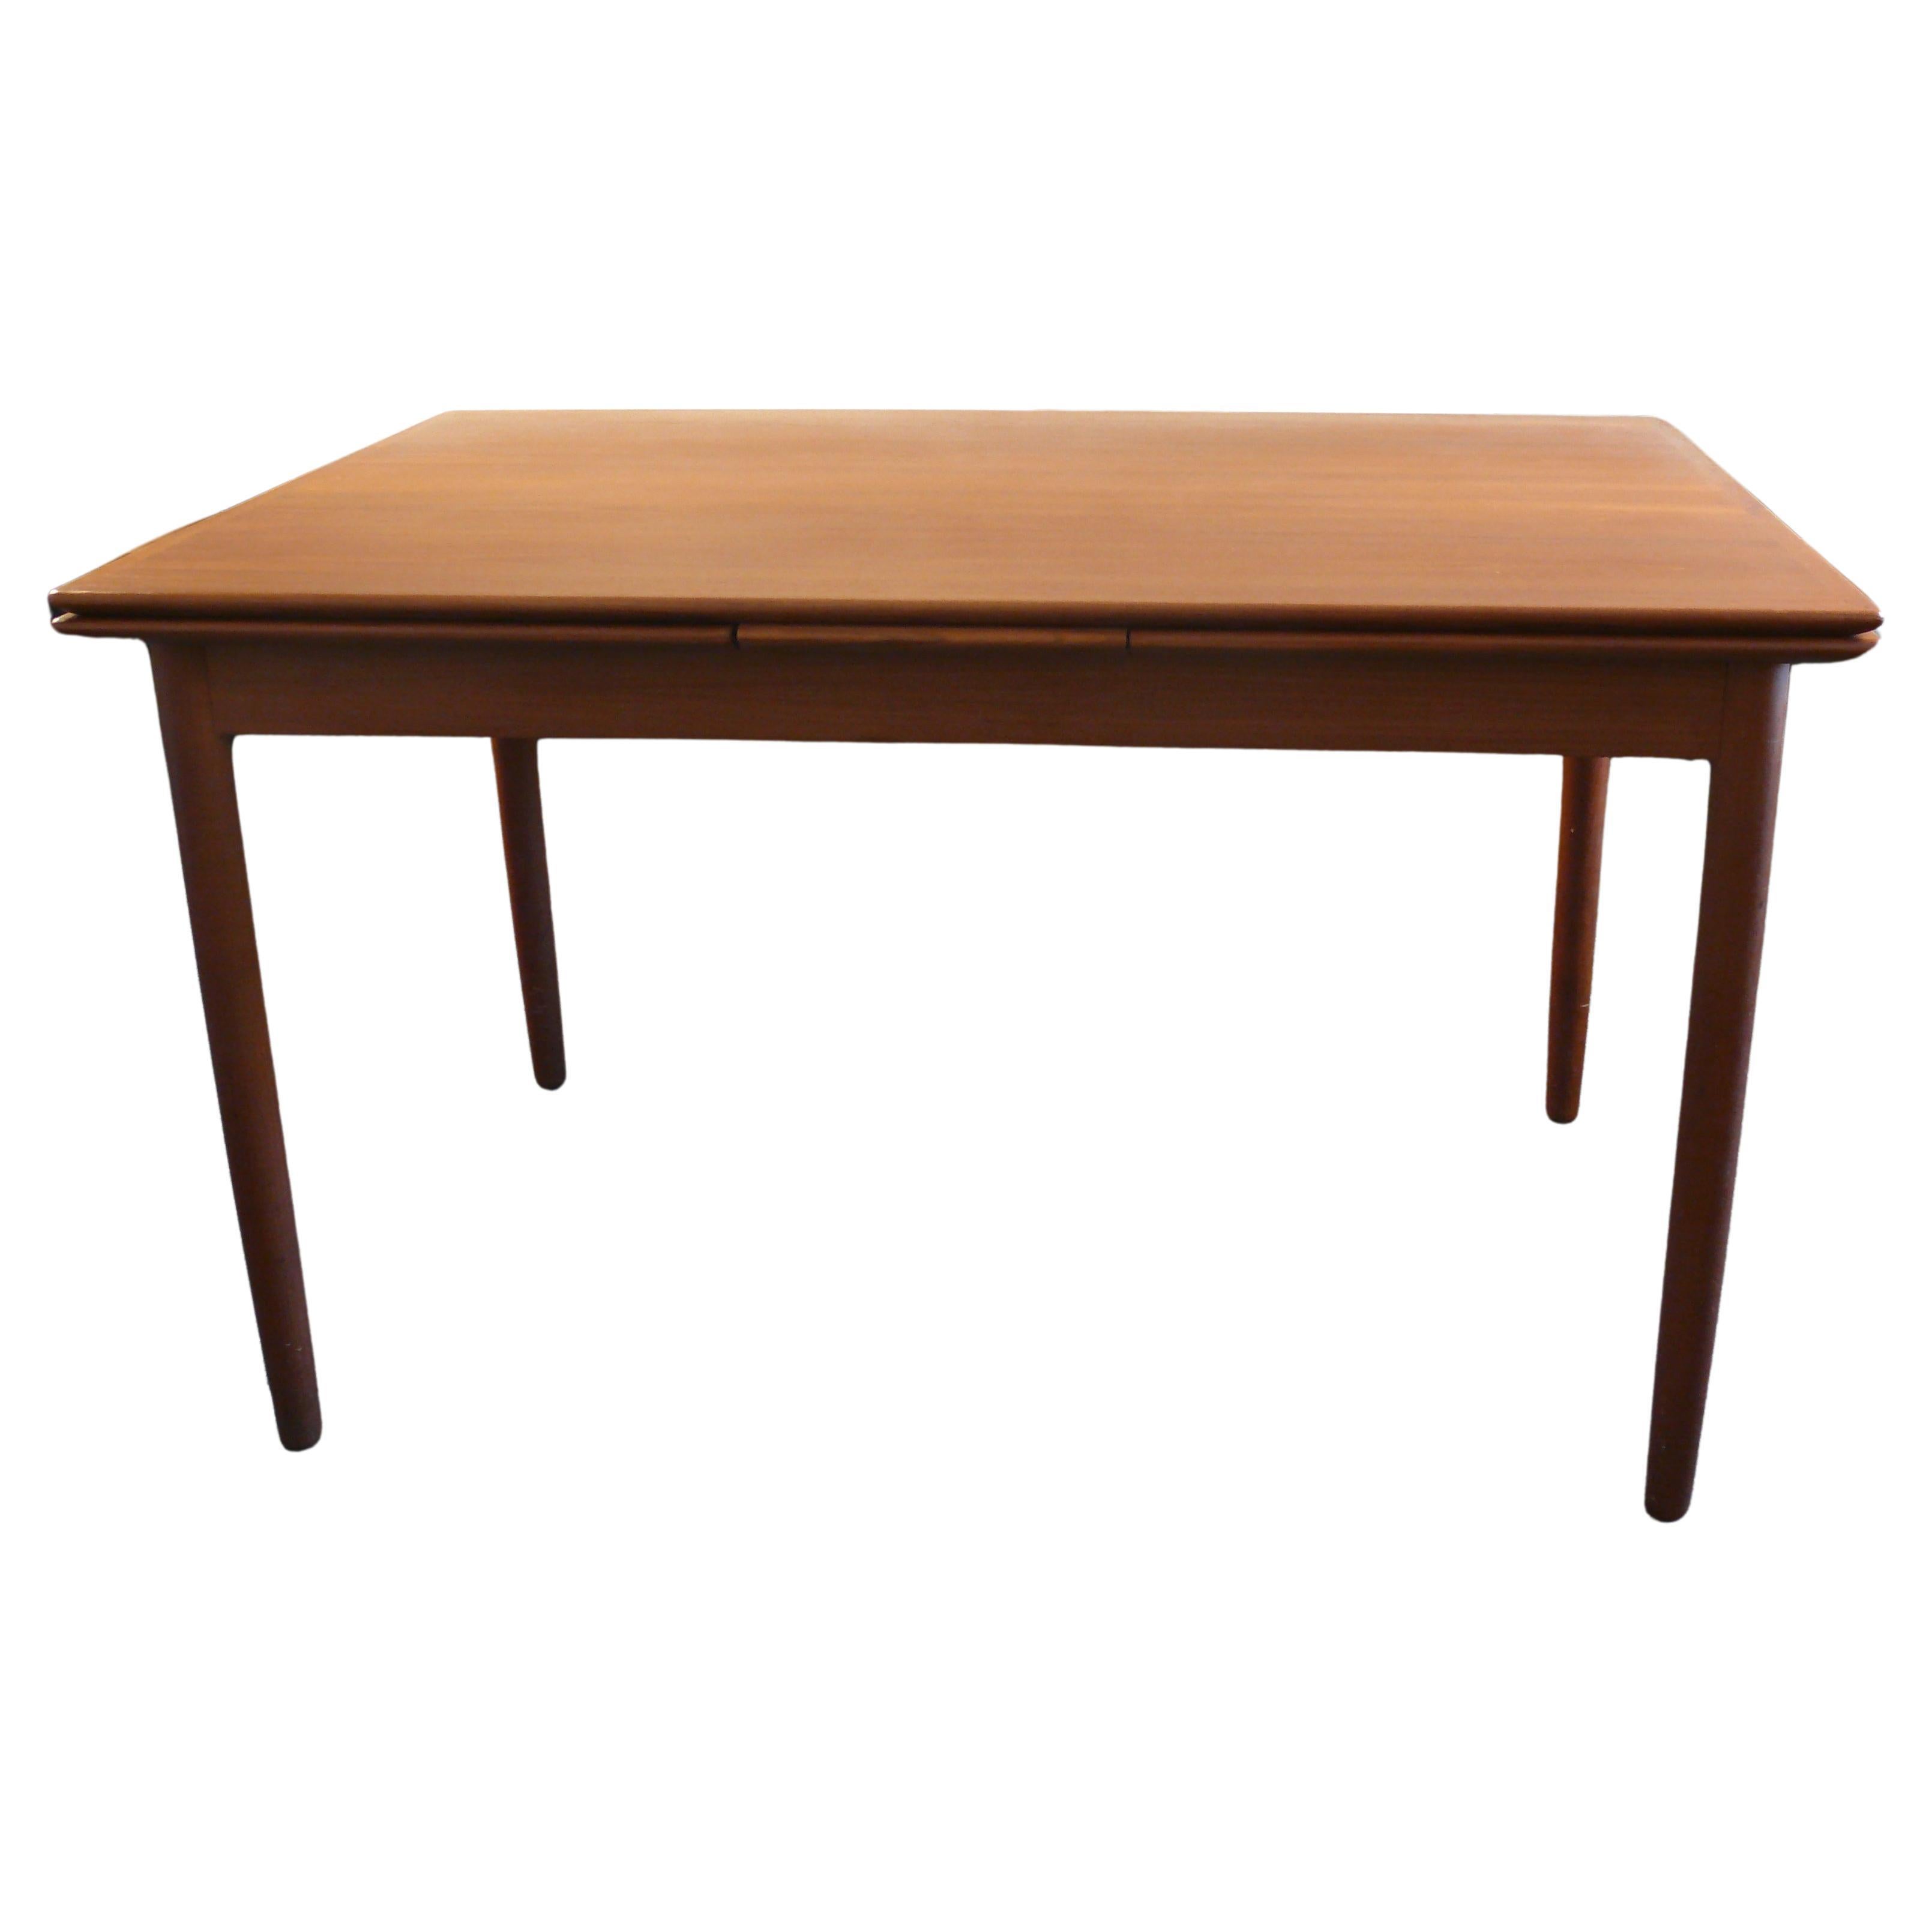 High-quality, extendable teak dining table, Denmark 1960s. A beautiful piece of design history of Nordic design from the 1960s. The table tops have rounded solid wood edges and veneered surfaces. The table can be pulled out both left and right, the